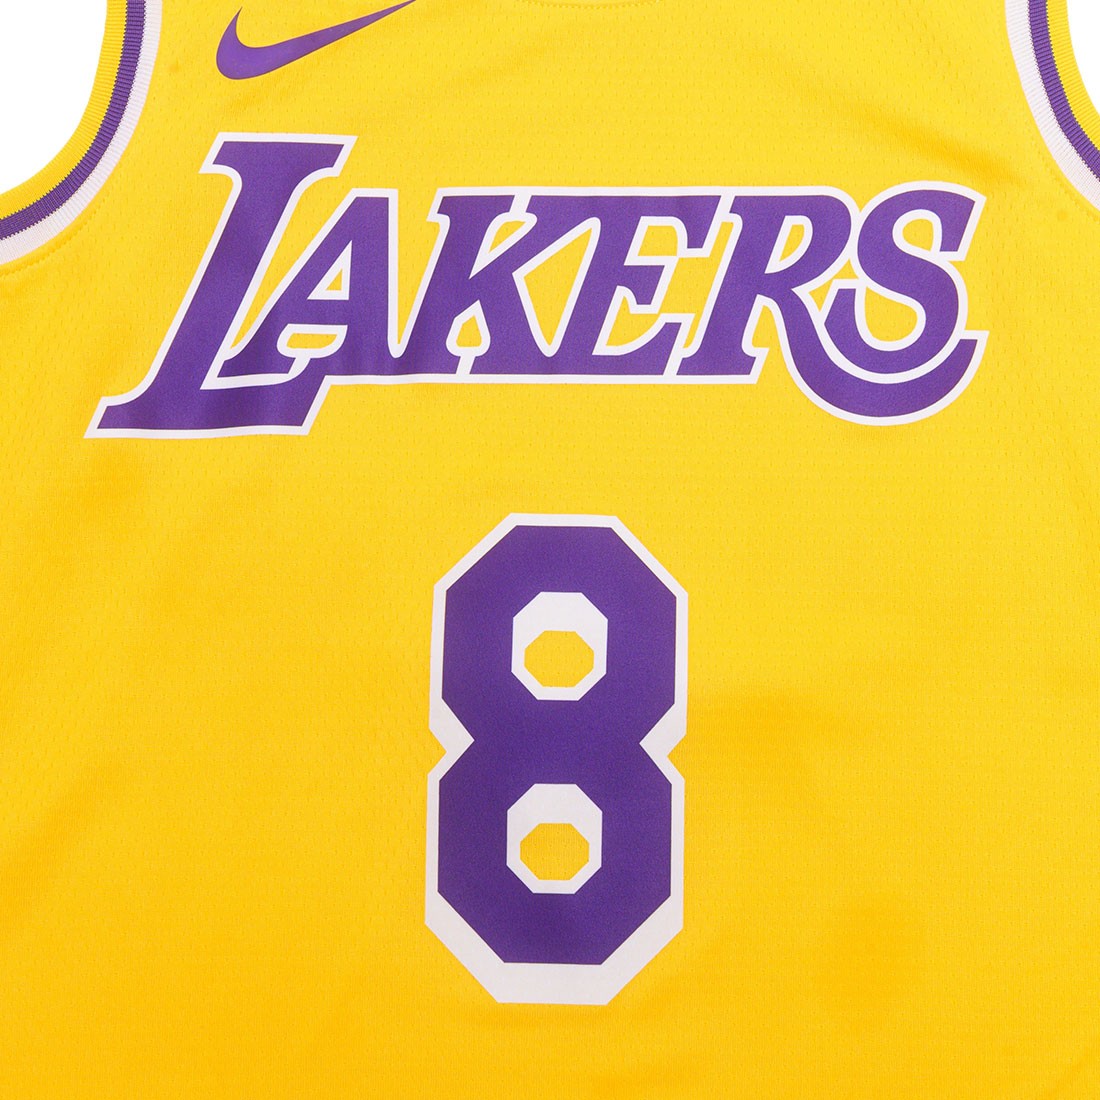 100% Authentic Kobe Bryant Los Angeles Lakers Icon Edition Jersey